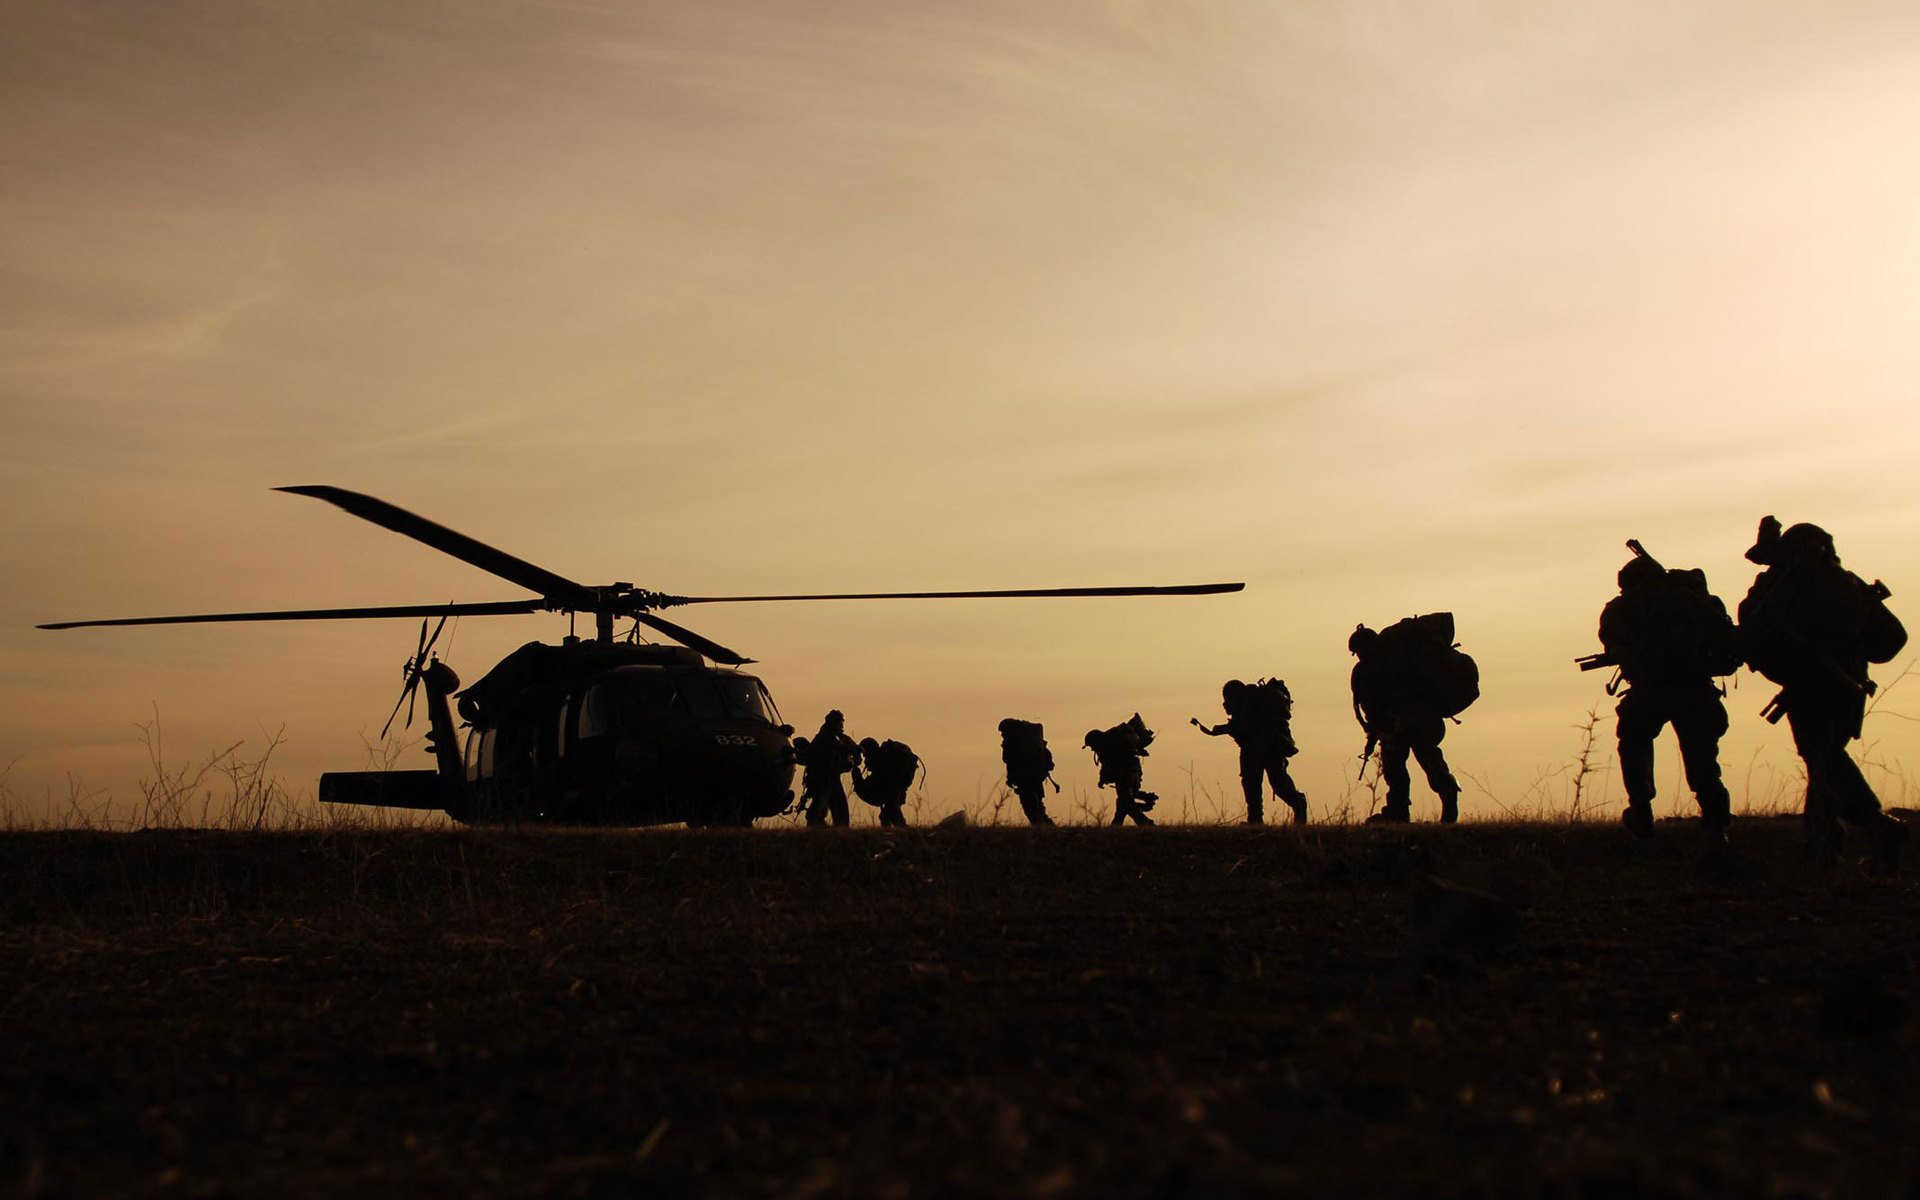 Us Army Wallpaper Hd Wallpapers in War n Army Imagescicom